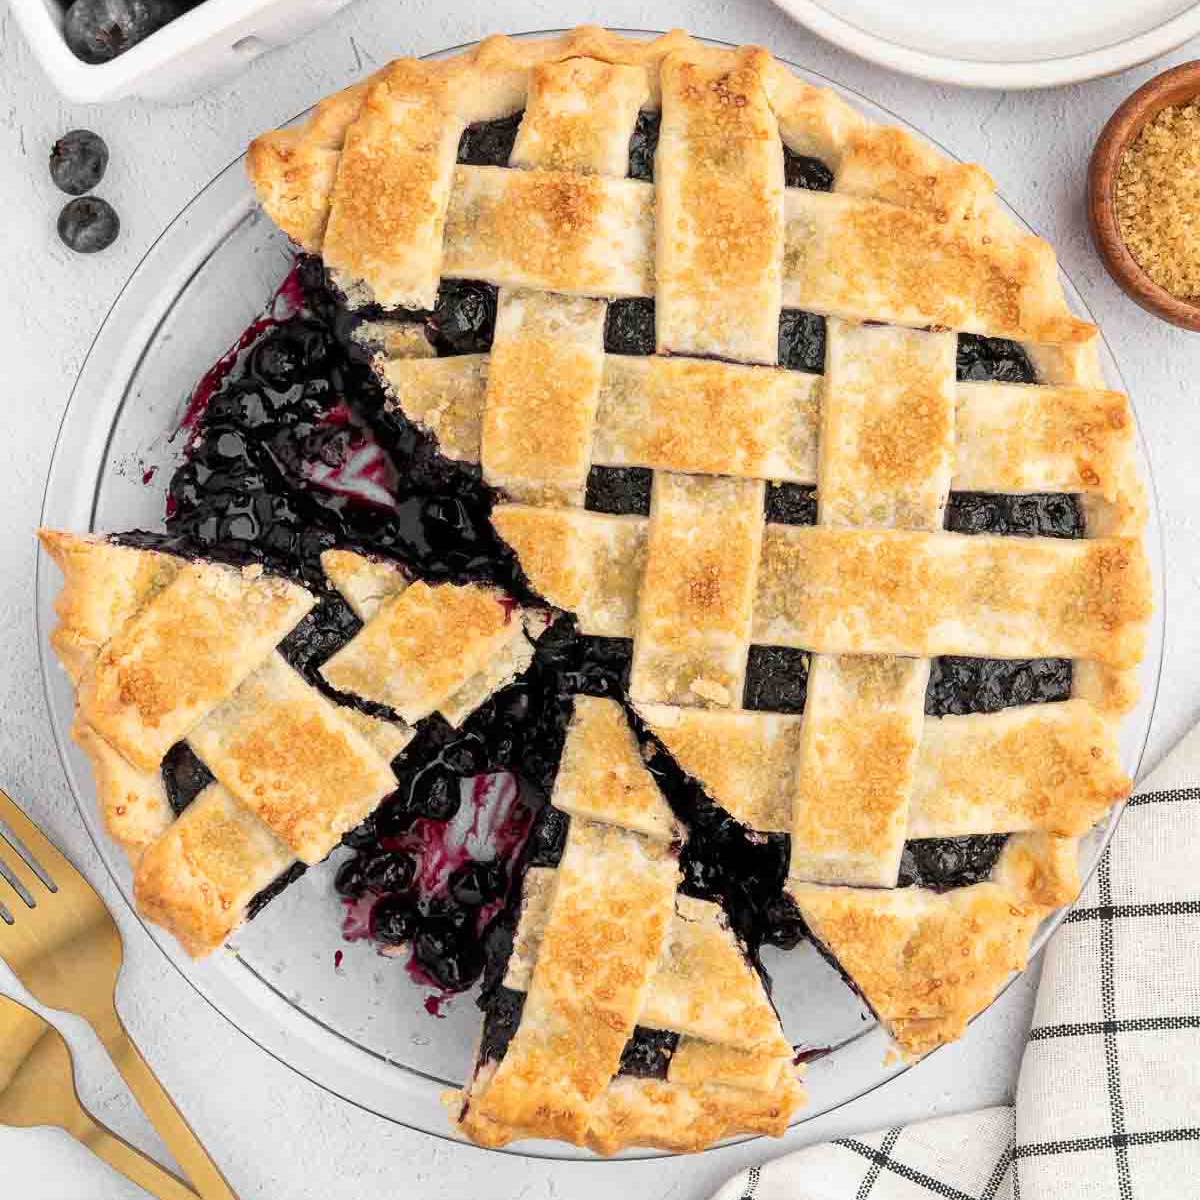 A vegan blueberry pie with a cross-hatch pastry crust sliced with blueberry filling pouring out.